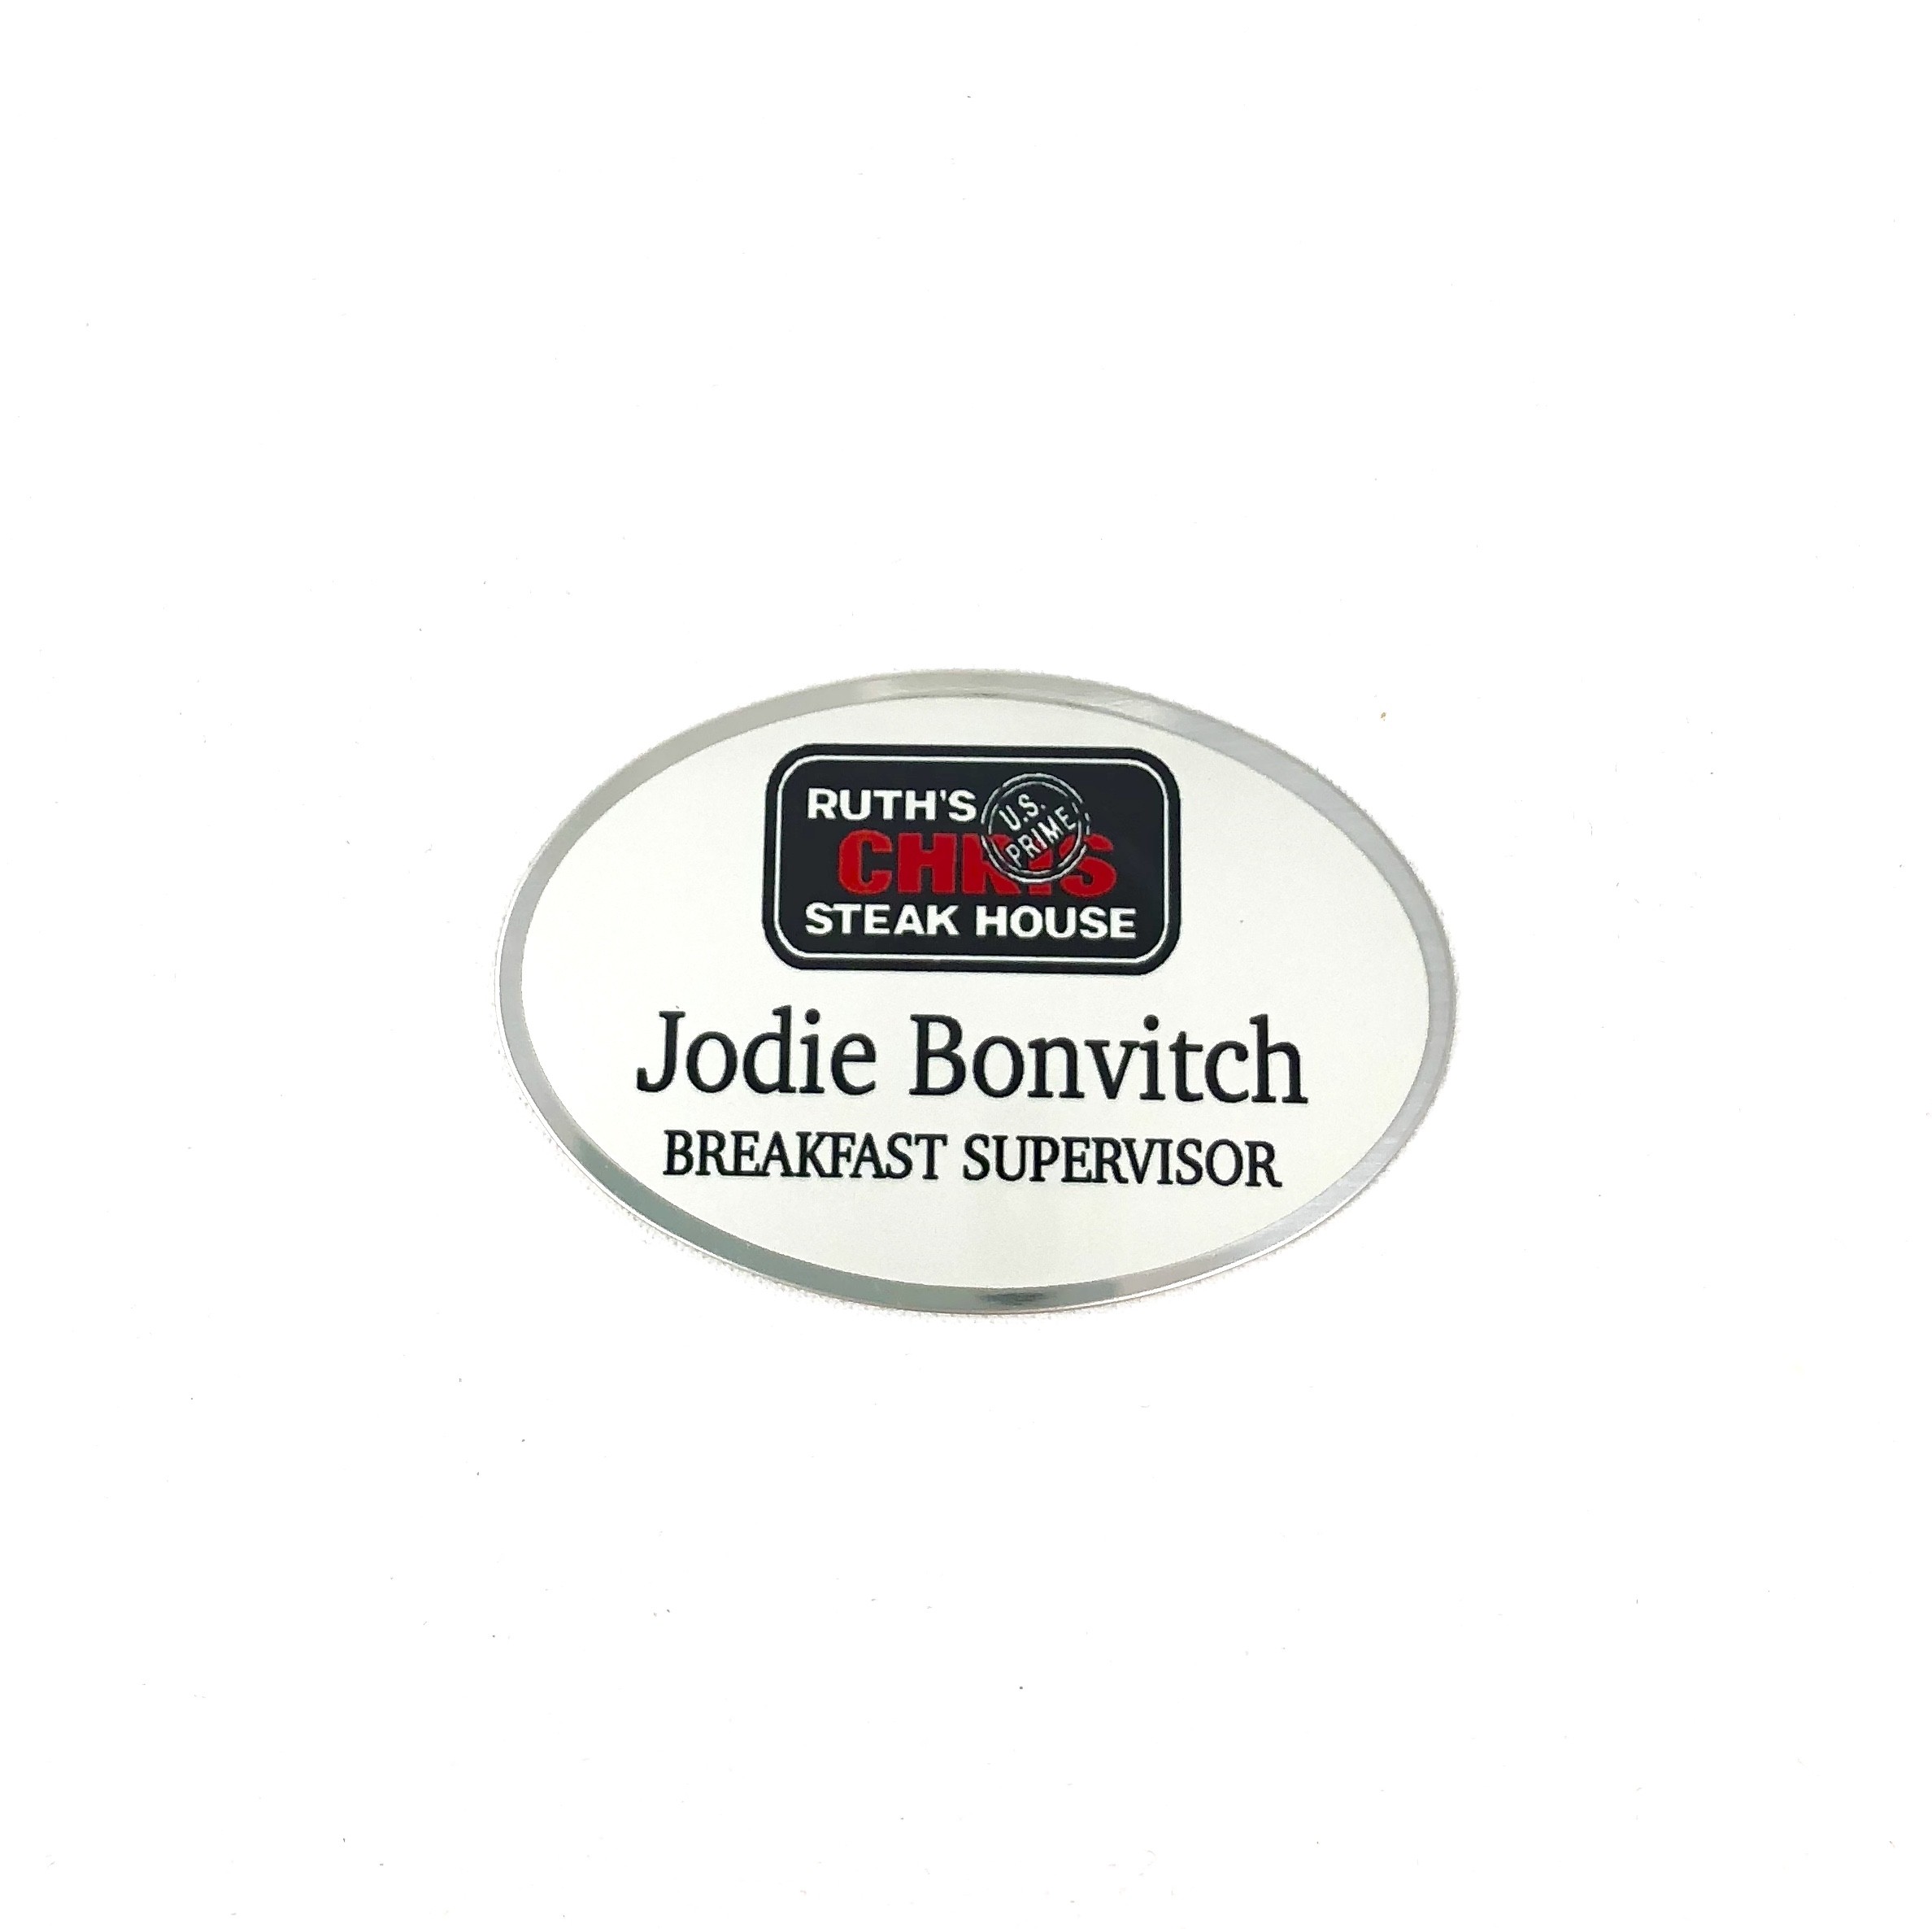 Ruth's Chris Preferred Silver Oval Name Tag